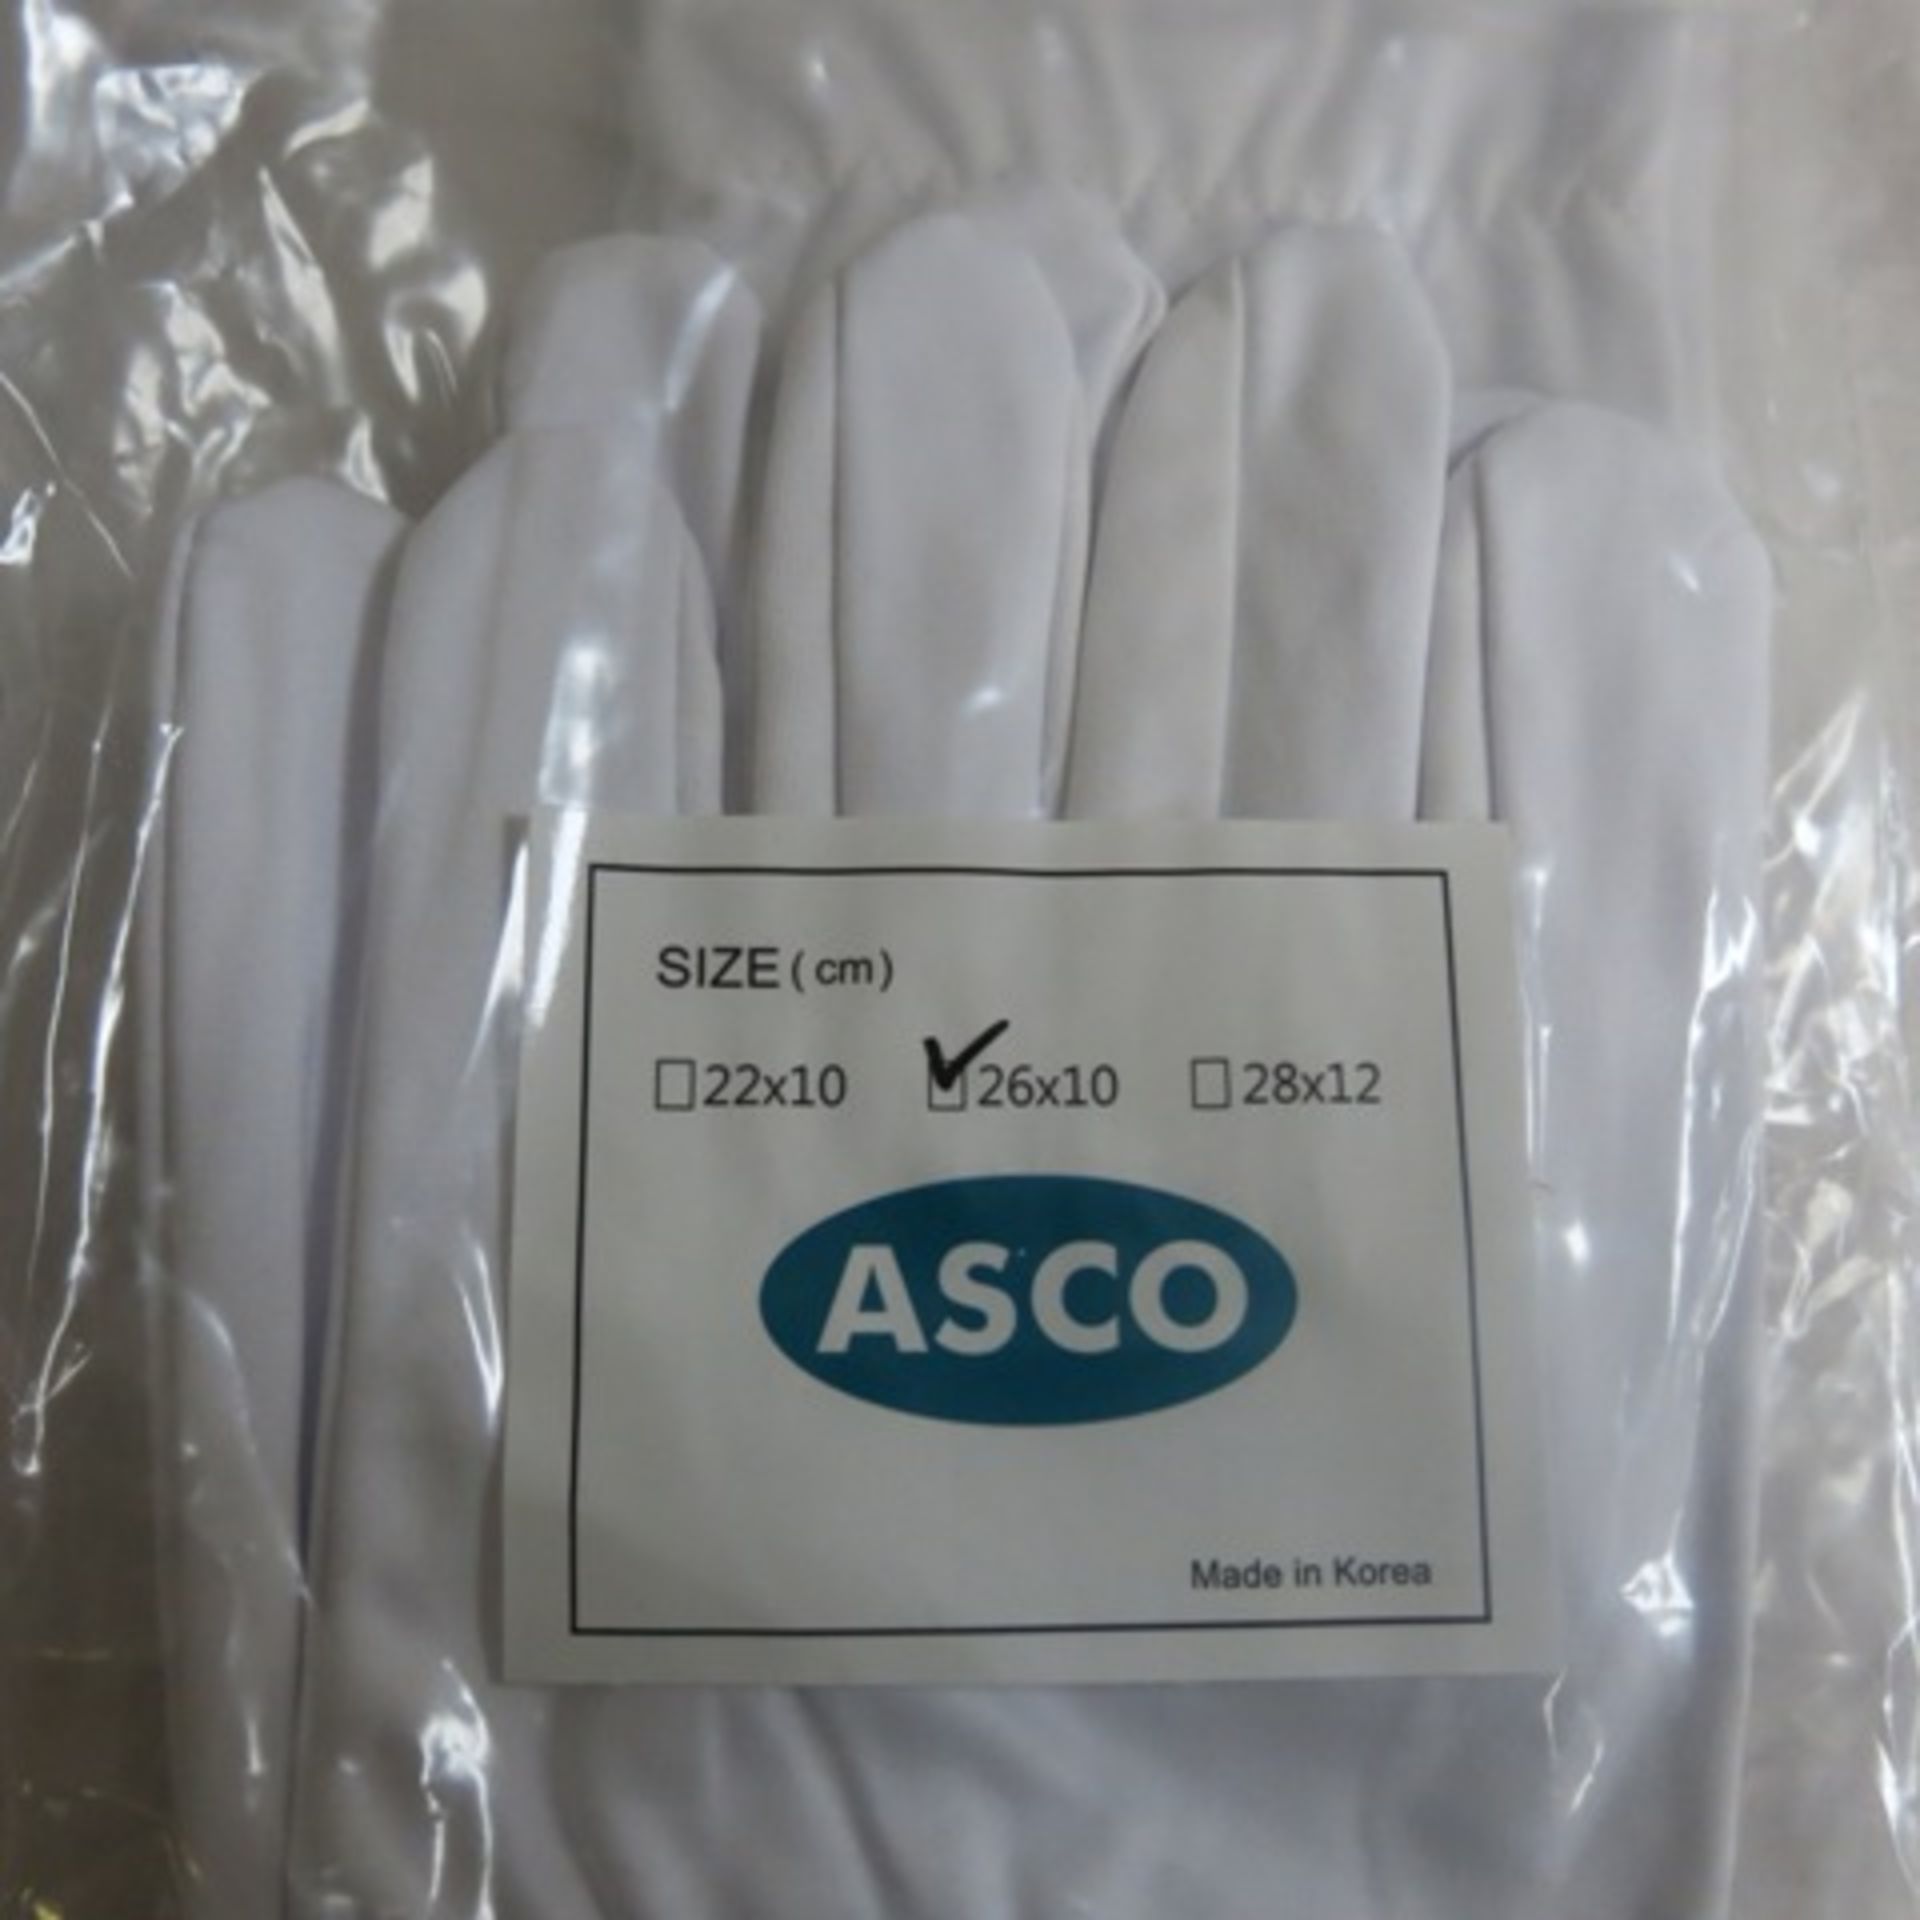 4 x New/Packaged Pairs or Asco Handling Gloves. Size 26 x 10cm. - Image 2 of 2